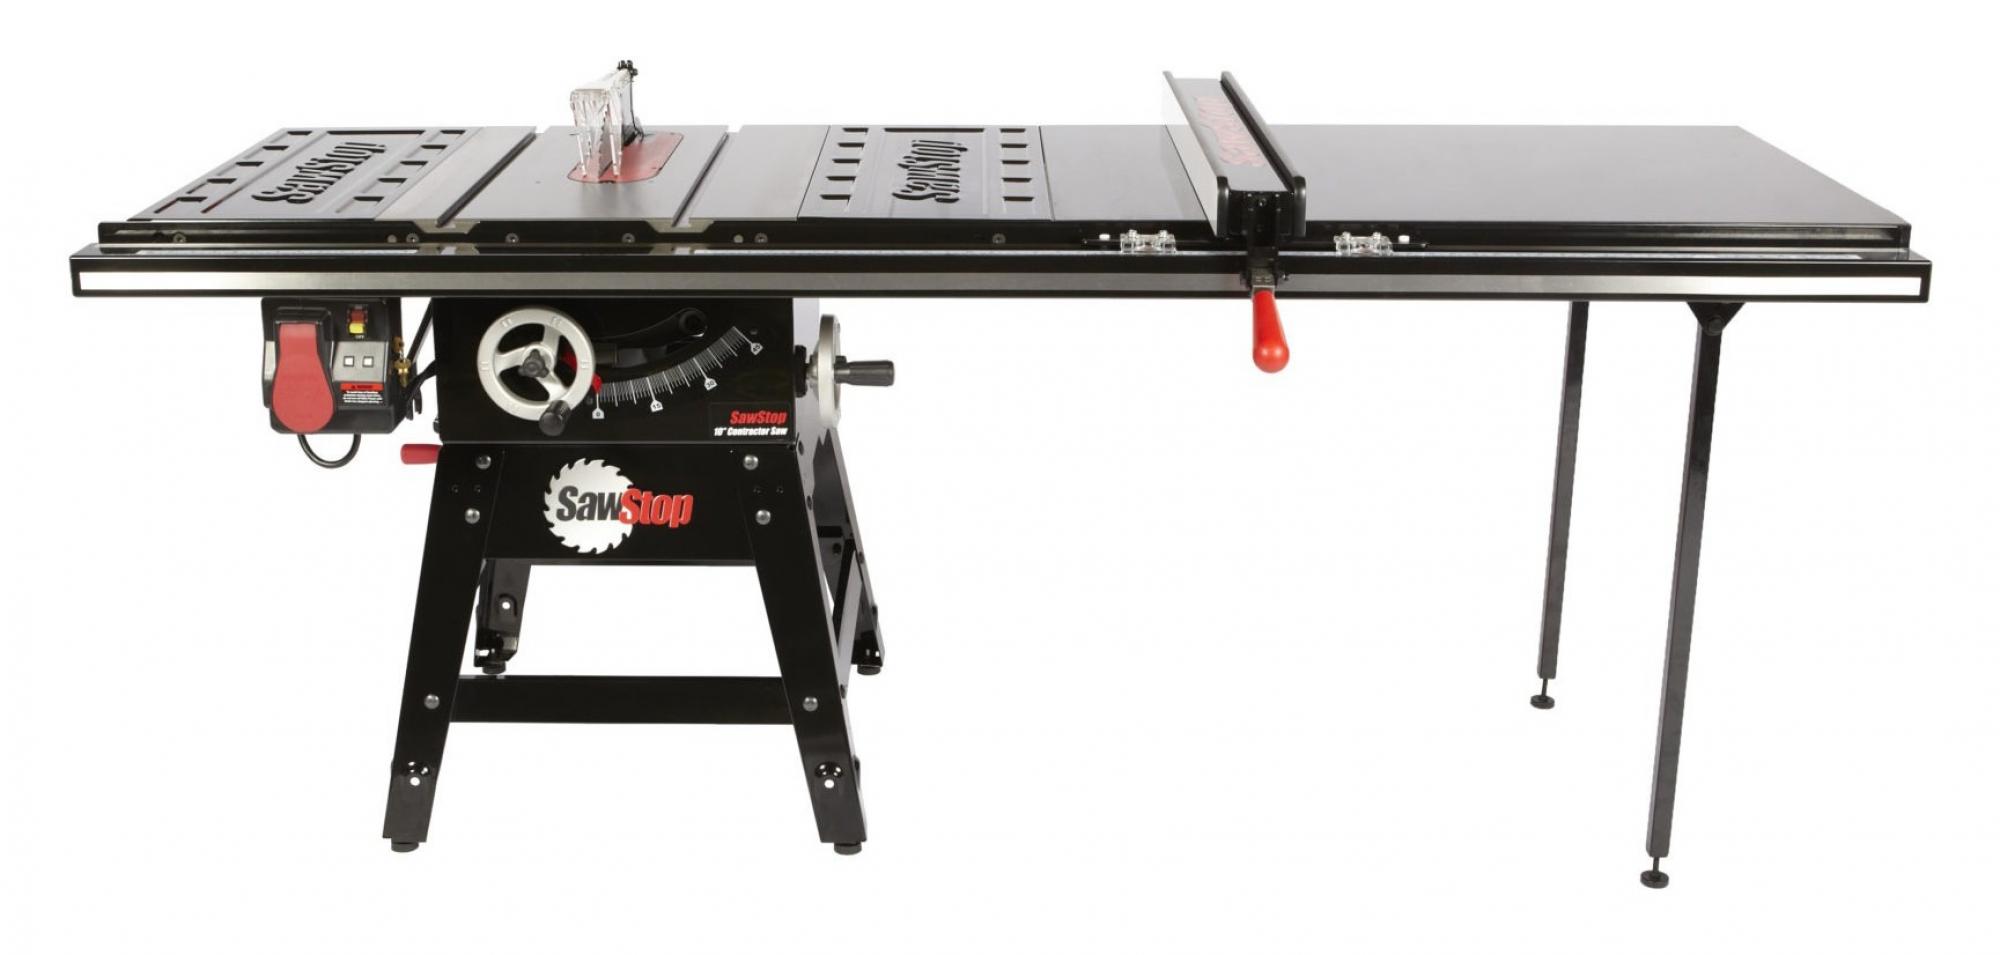 Contractor Table Saw (CNS175-TGP252) SawStop